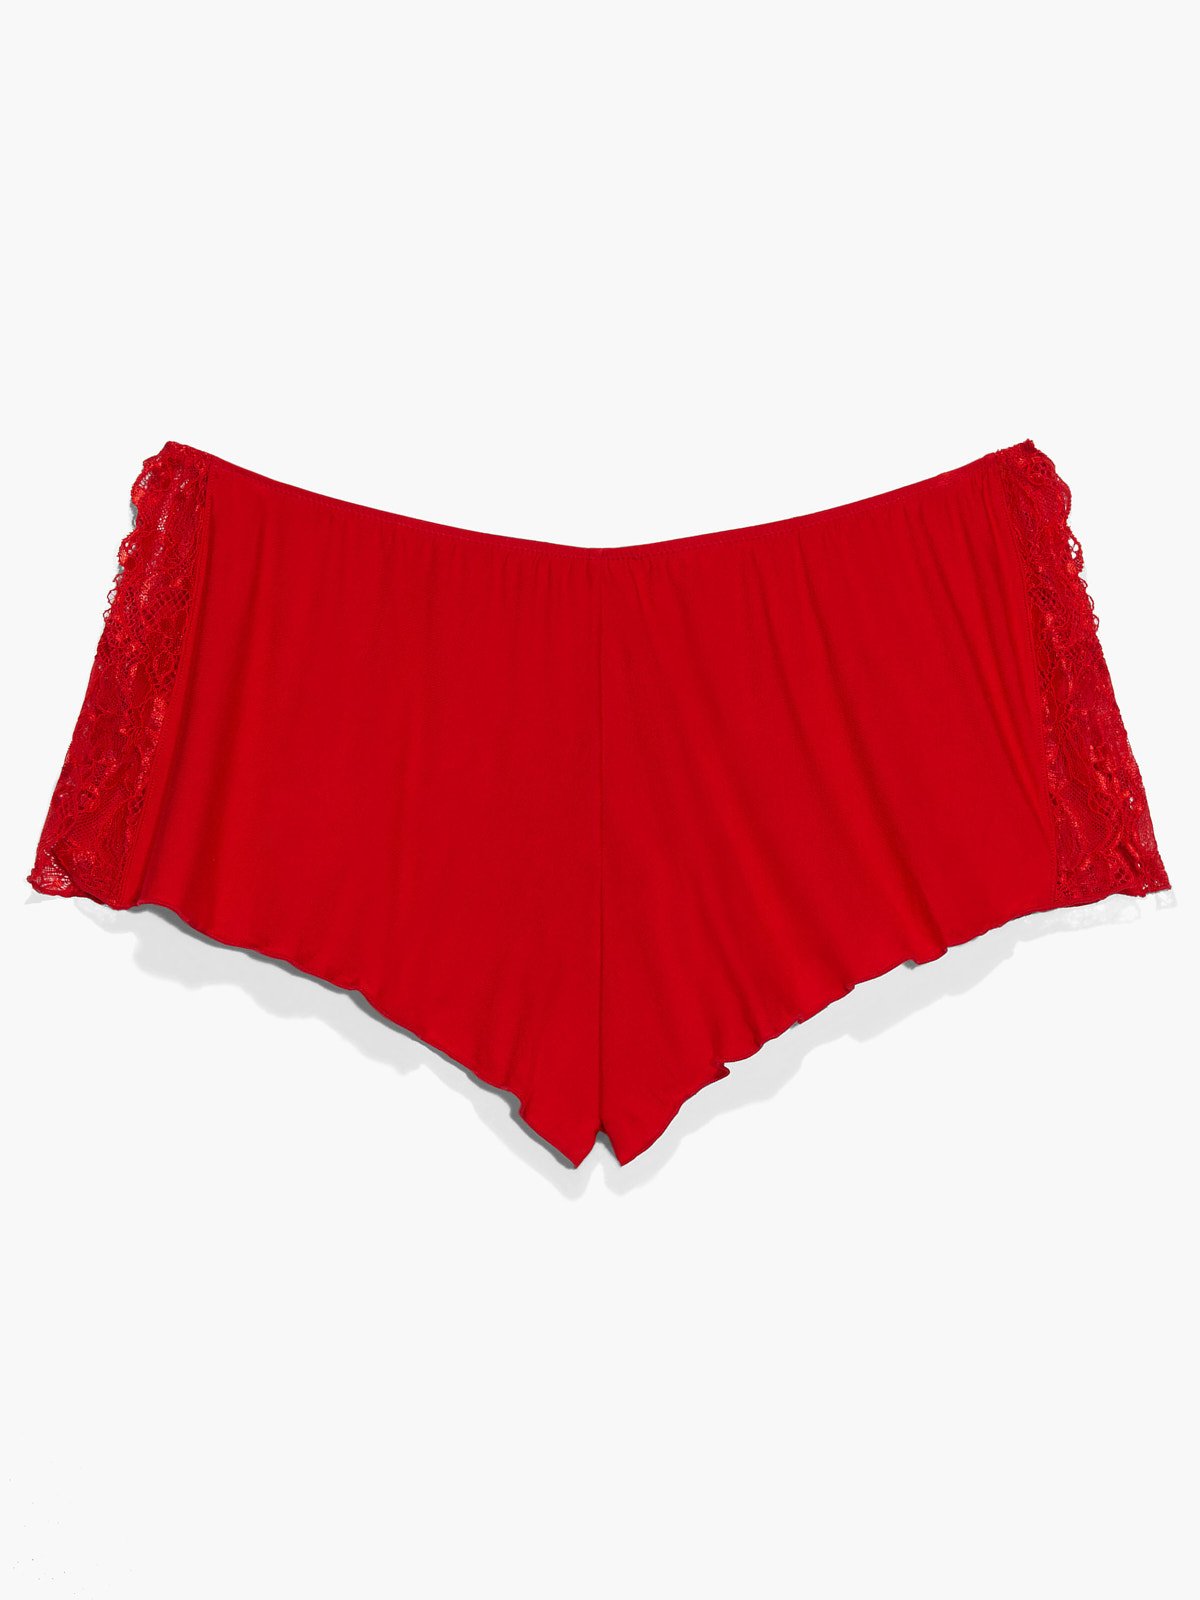 Lace'd Up Shorts in Pink & Red